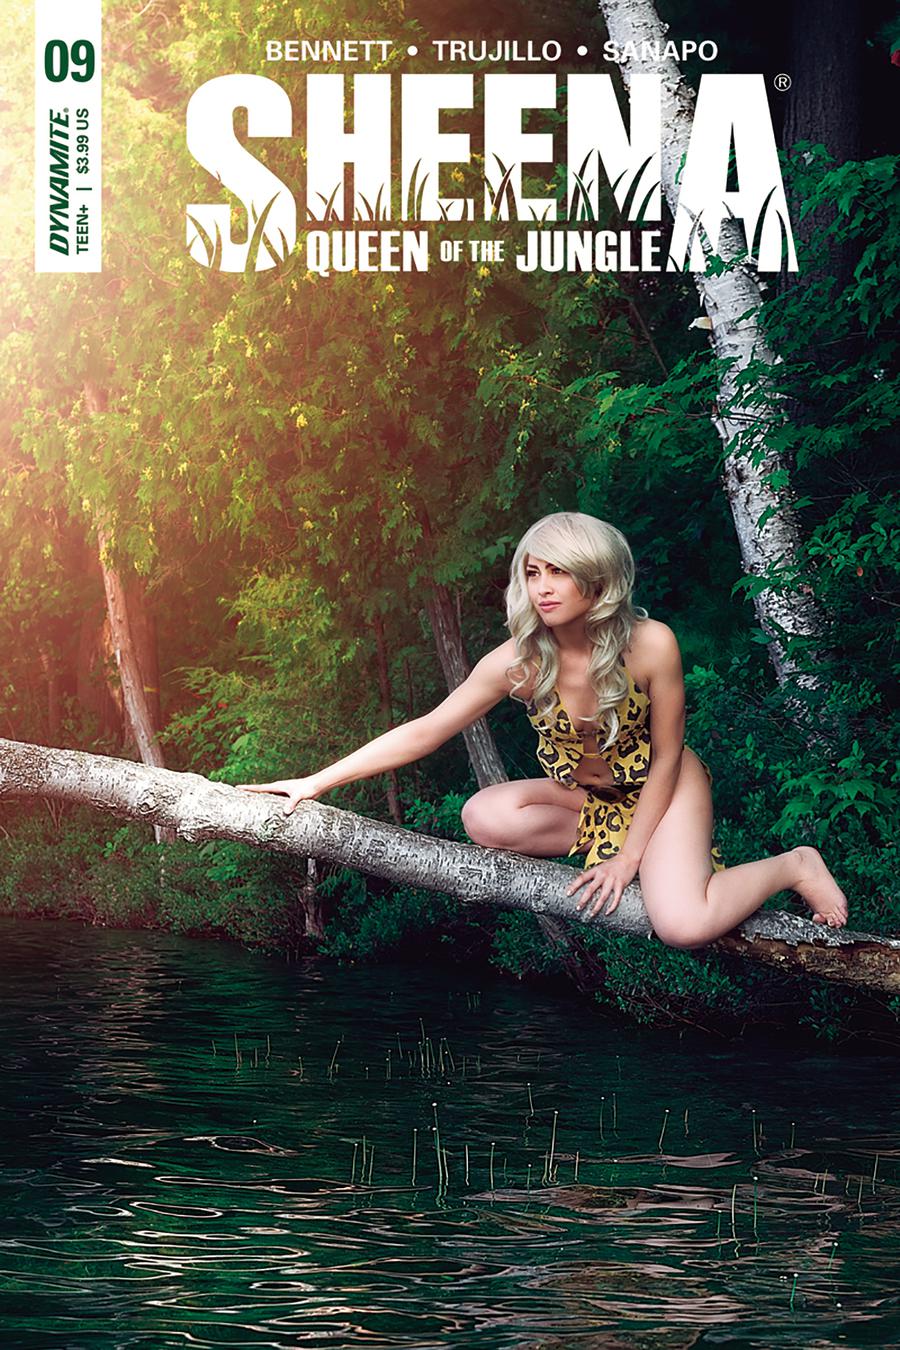 Sheena Vol 4 #9 Cover D Variant Cosplay Photo Cover